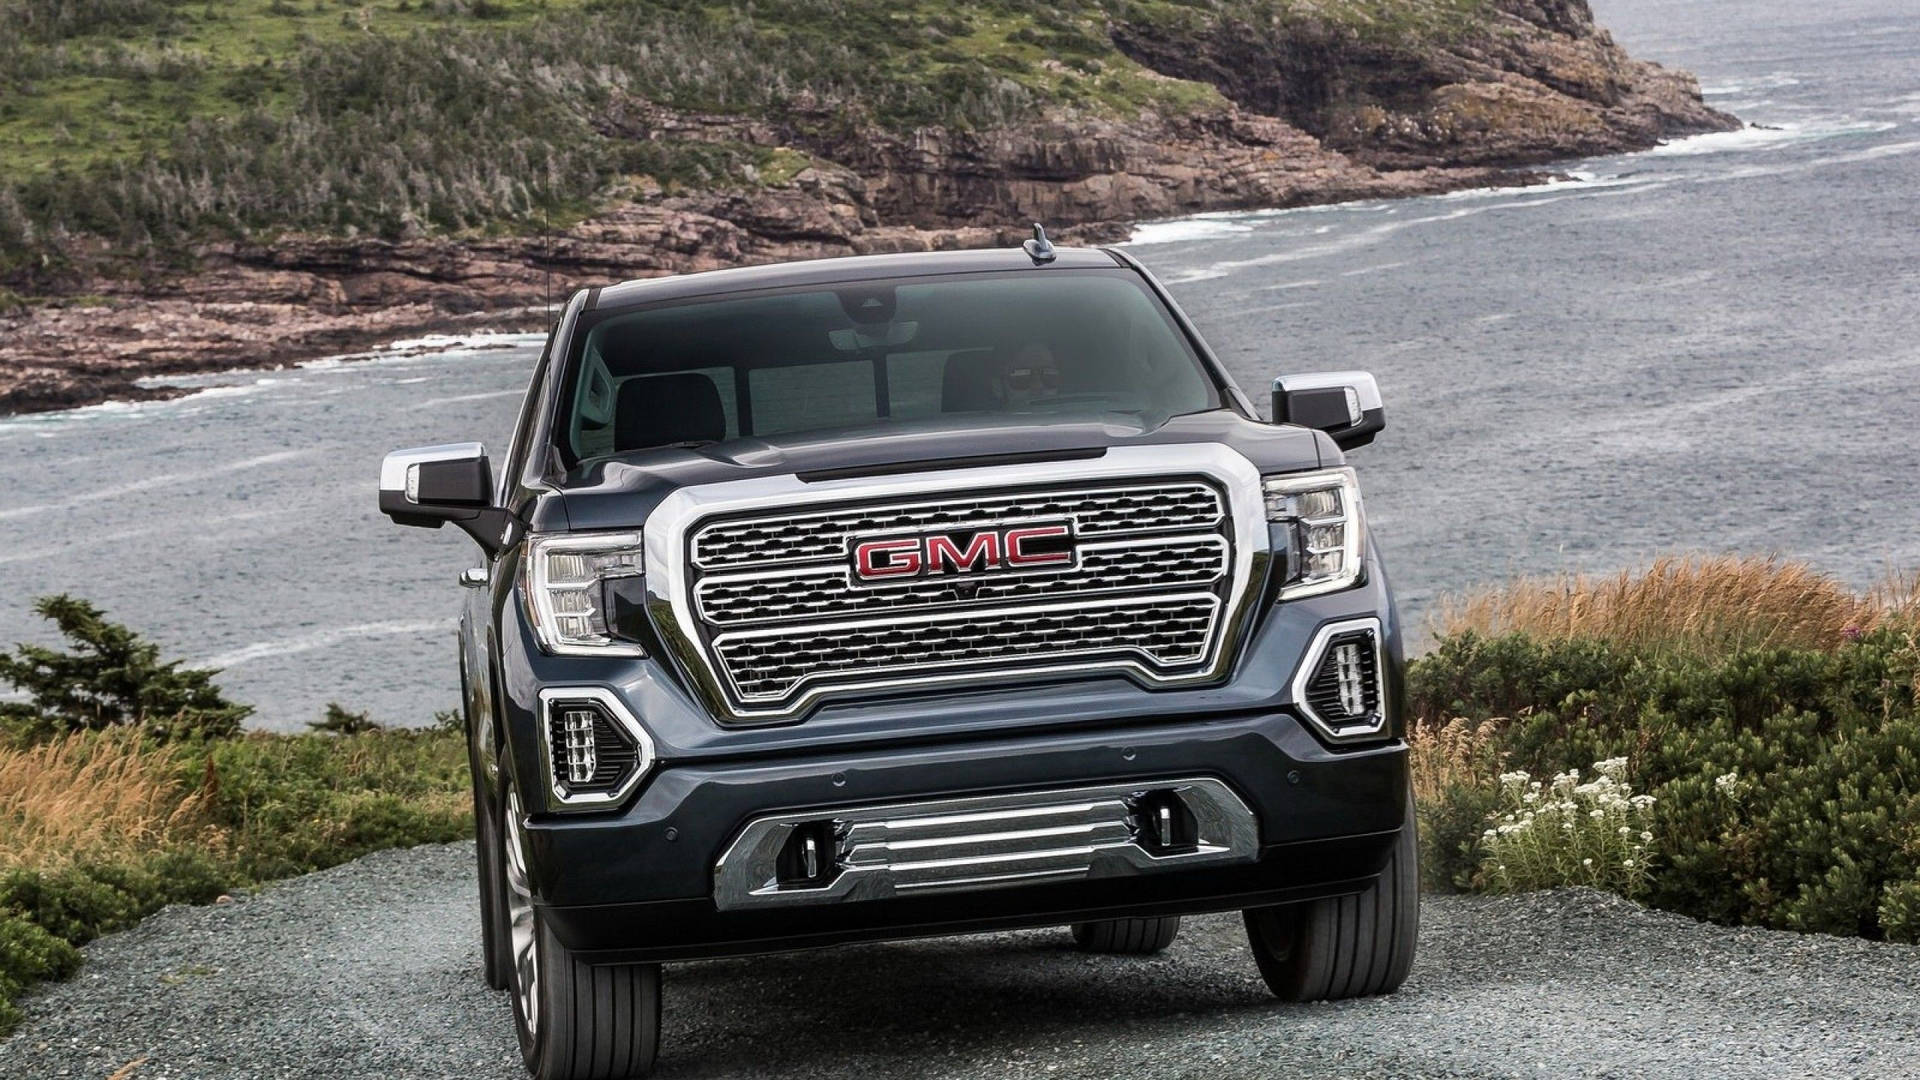 Gmc On The Uphill Road Background